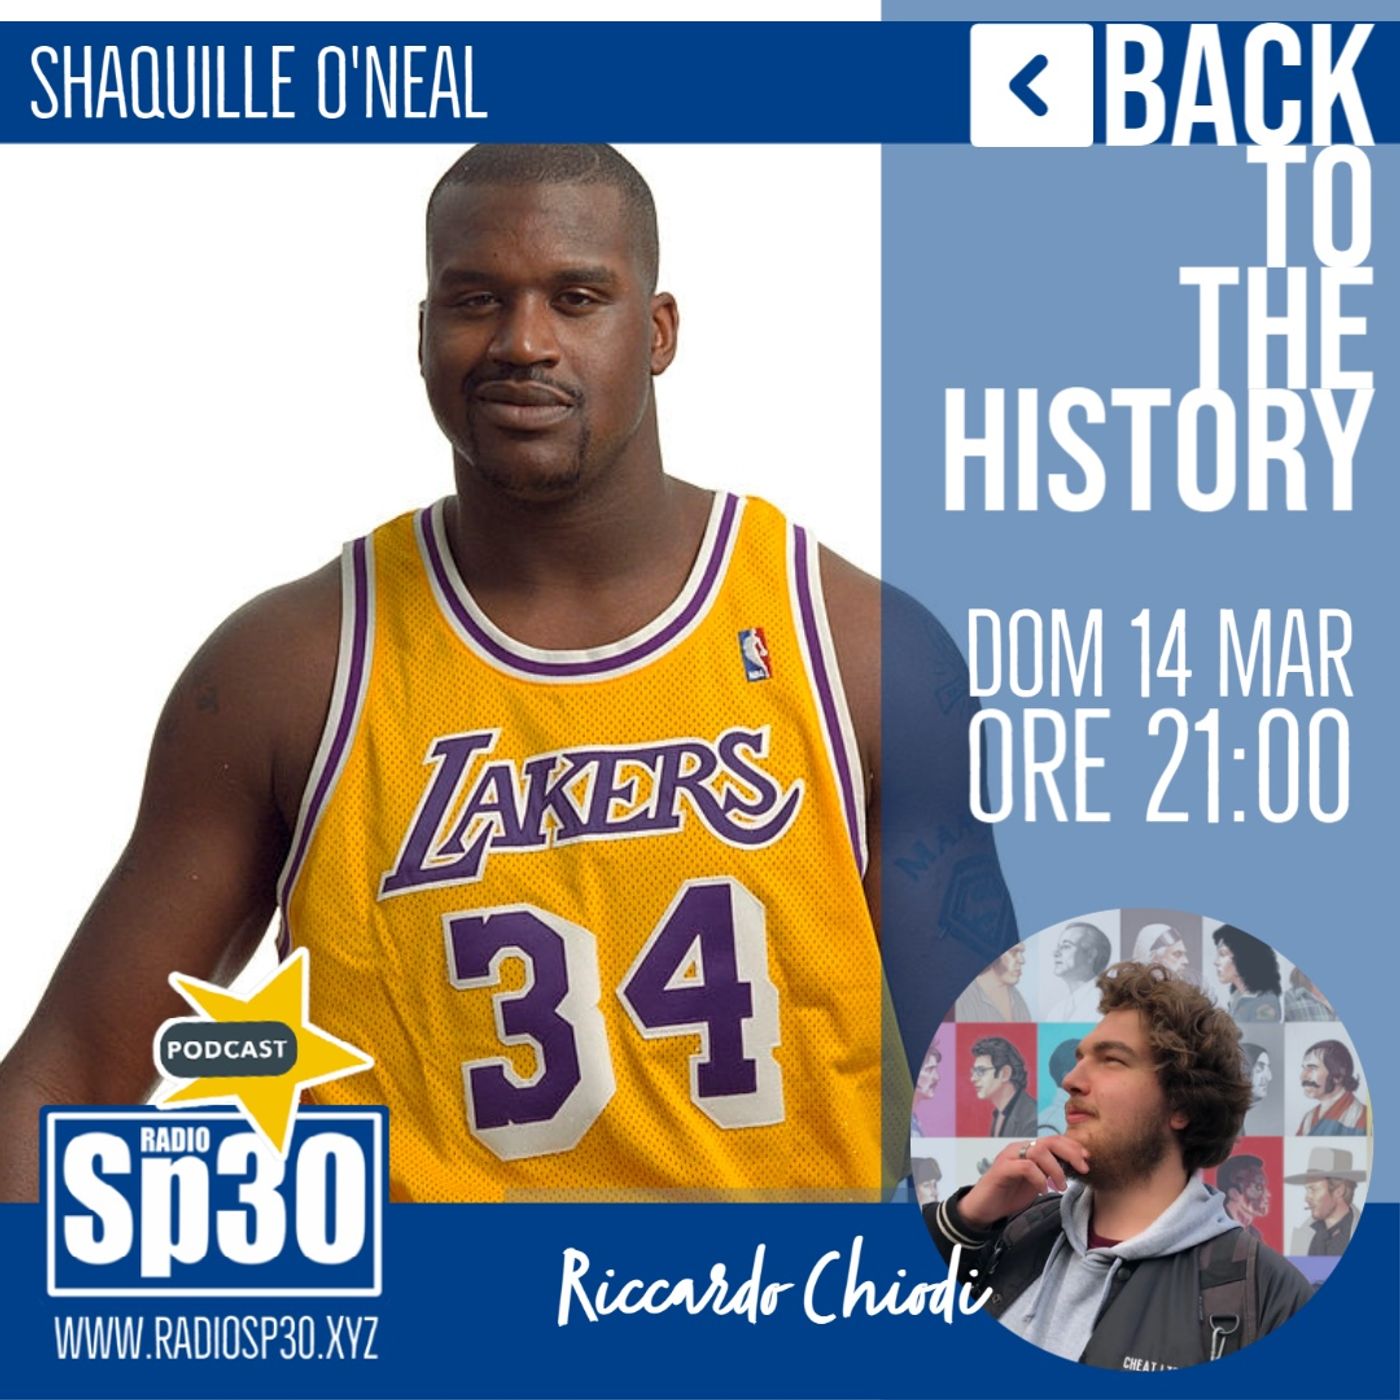 #backtothehistory - st.1 ep.2 - Shaquille O'Neal